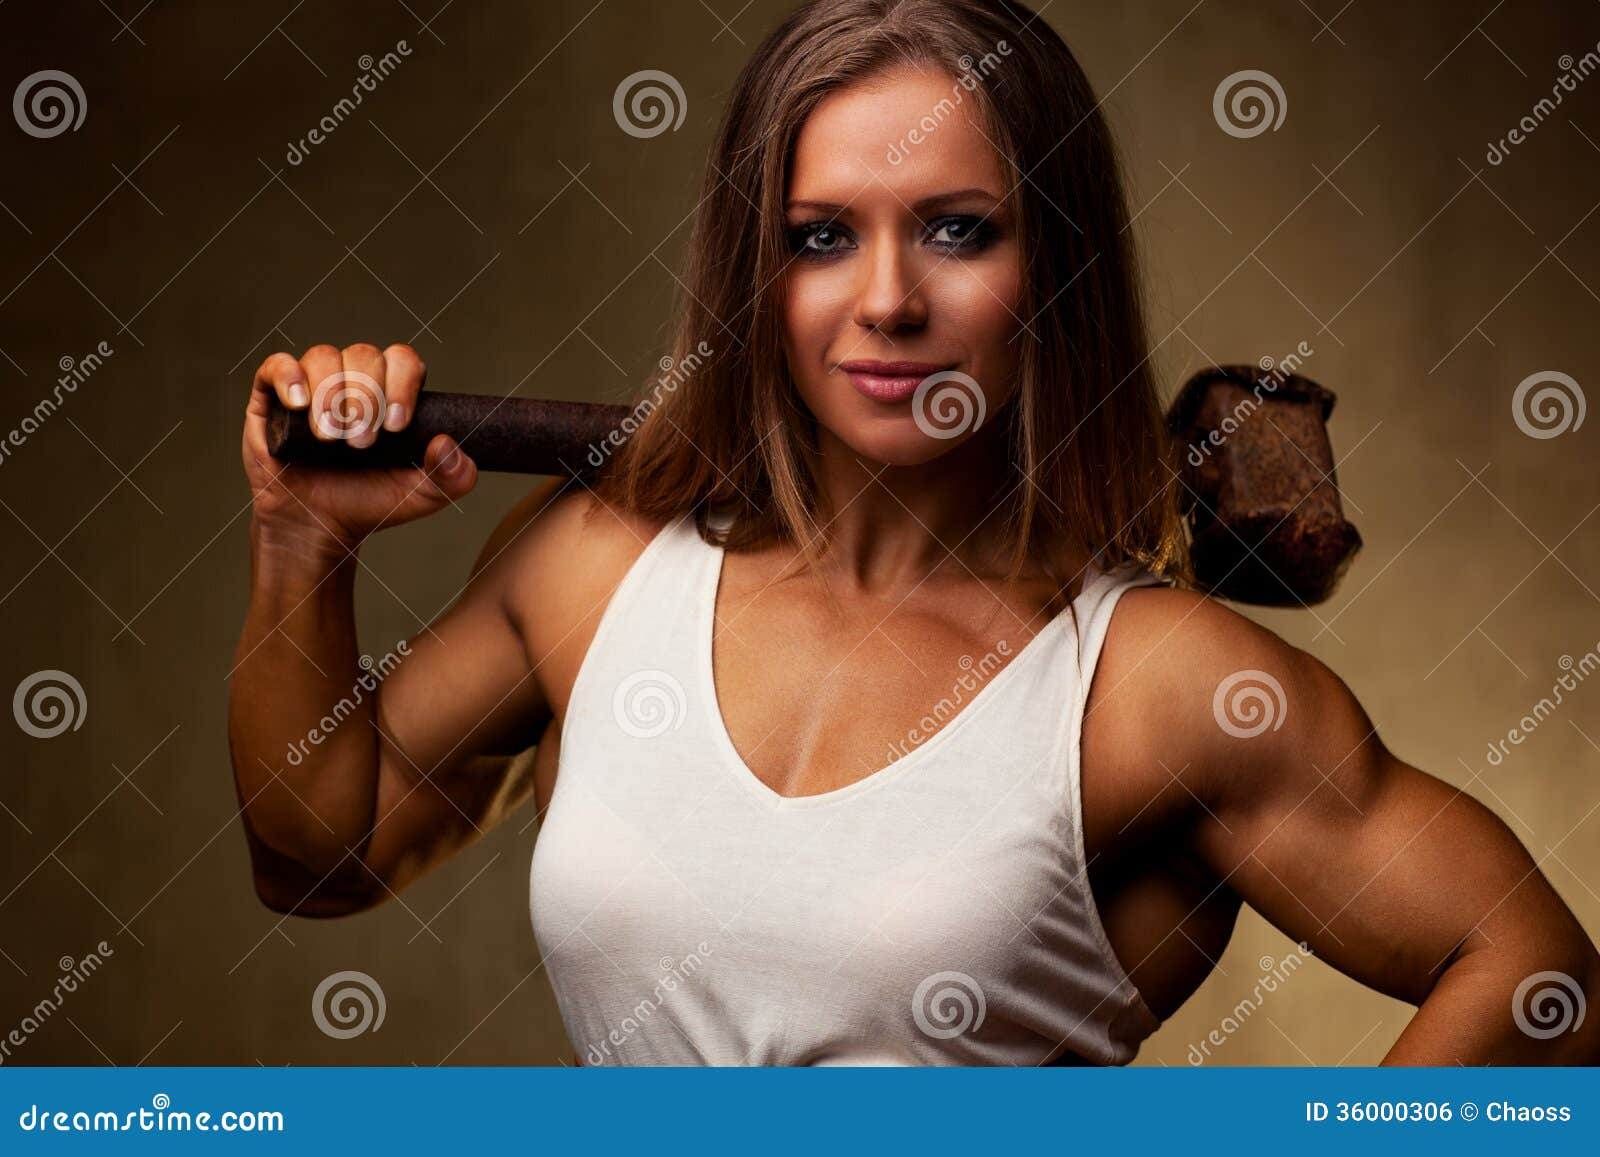 Solo female bodybuilder Only the